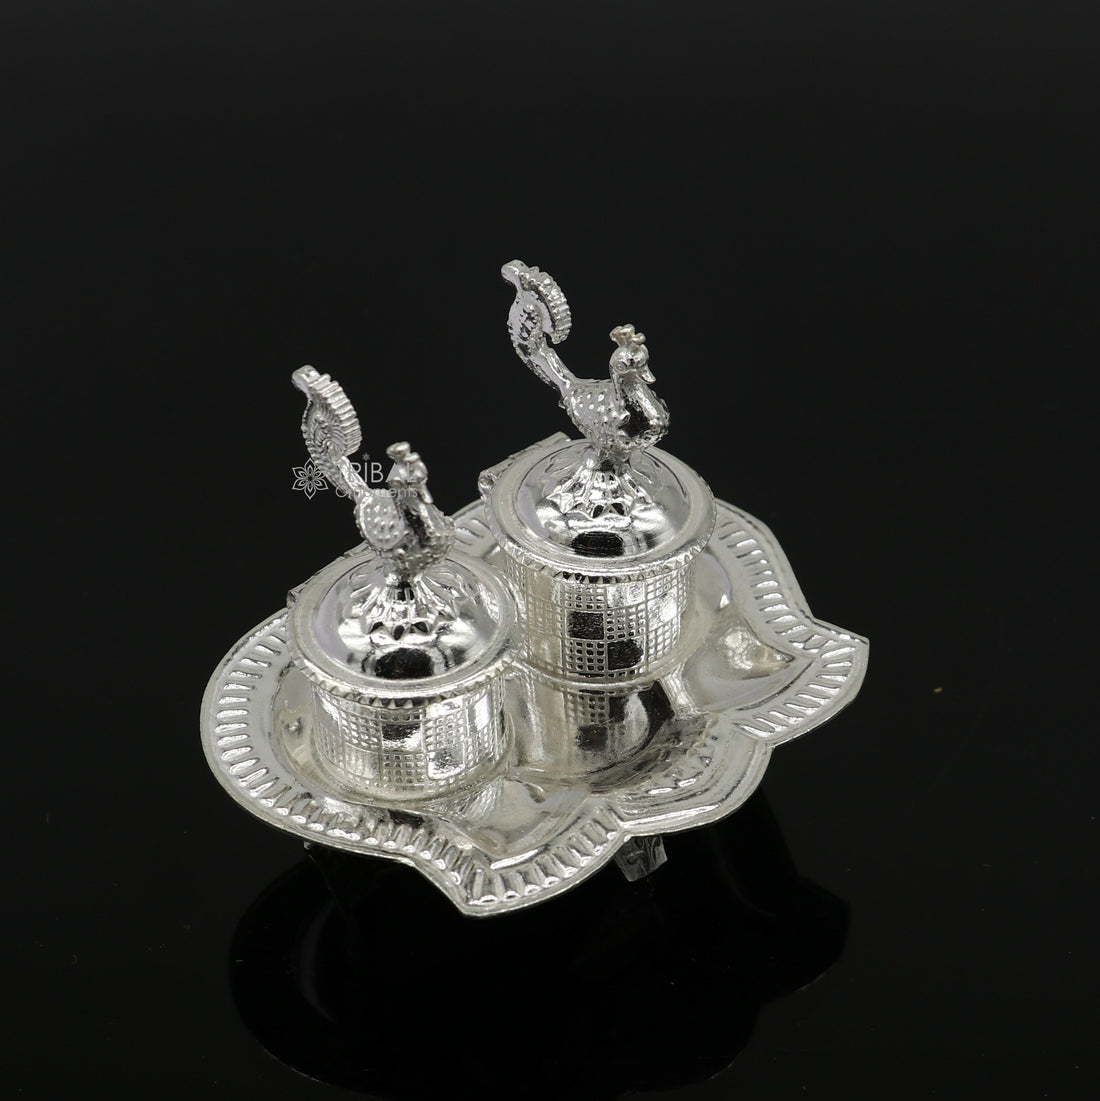 925 sterling silver handmade fabulous peacock design combo of two trinket box for kumkum sindur abil gulal rice best puja article stb826 - TRIBAL ORNAMENTS